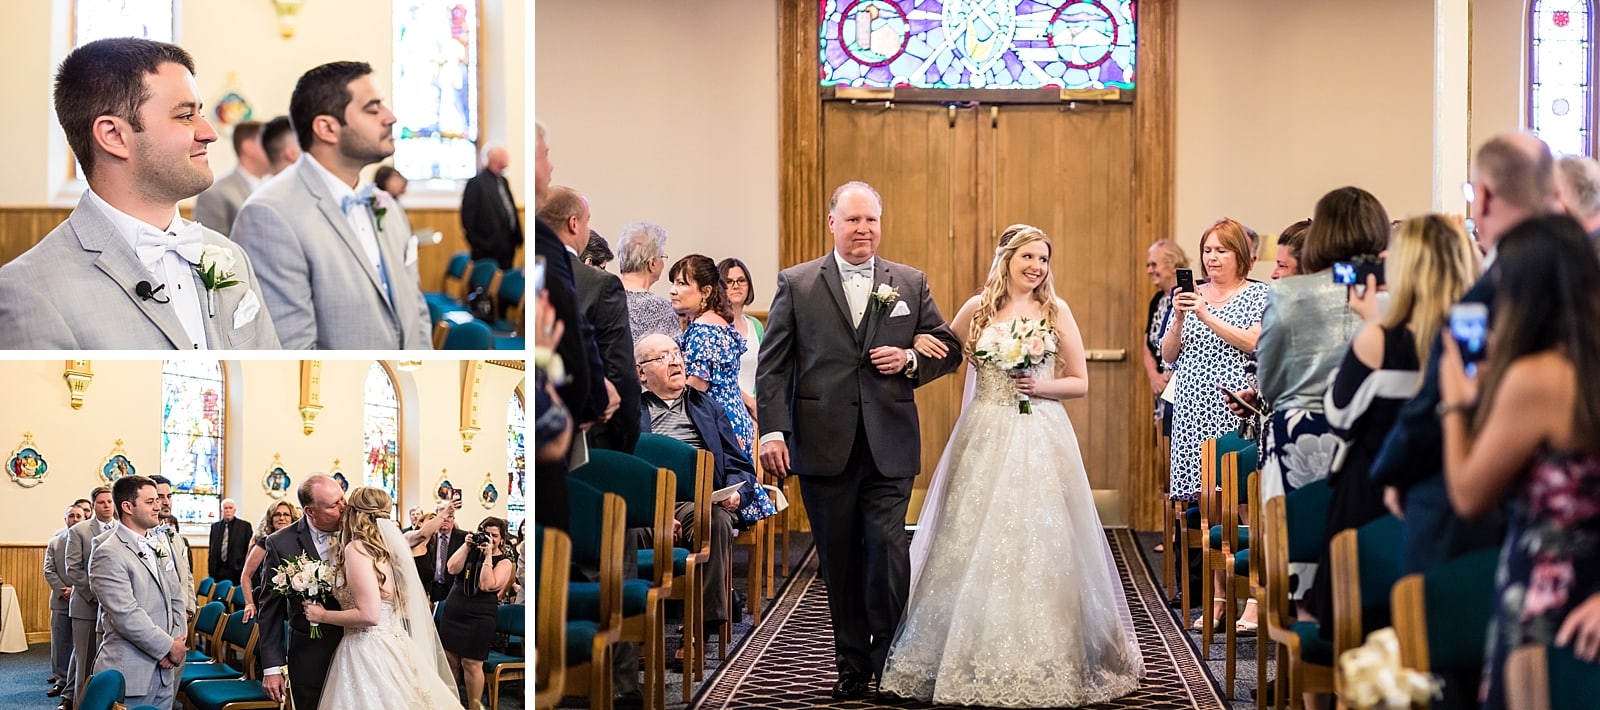 Wedding ceremony, church wedding, father of the bride walking down aisle, Father giving away bride, groom first look